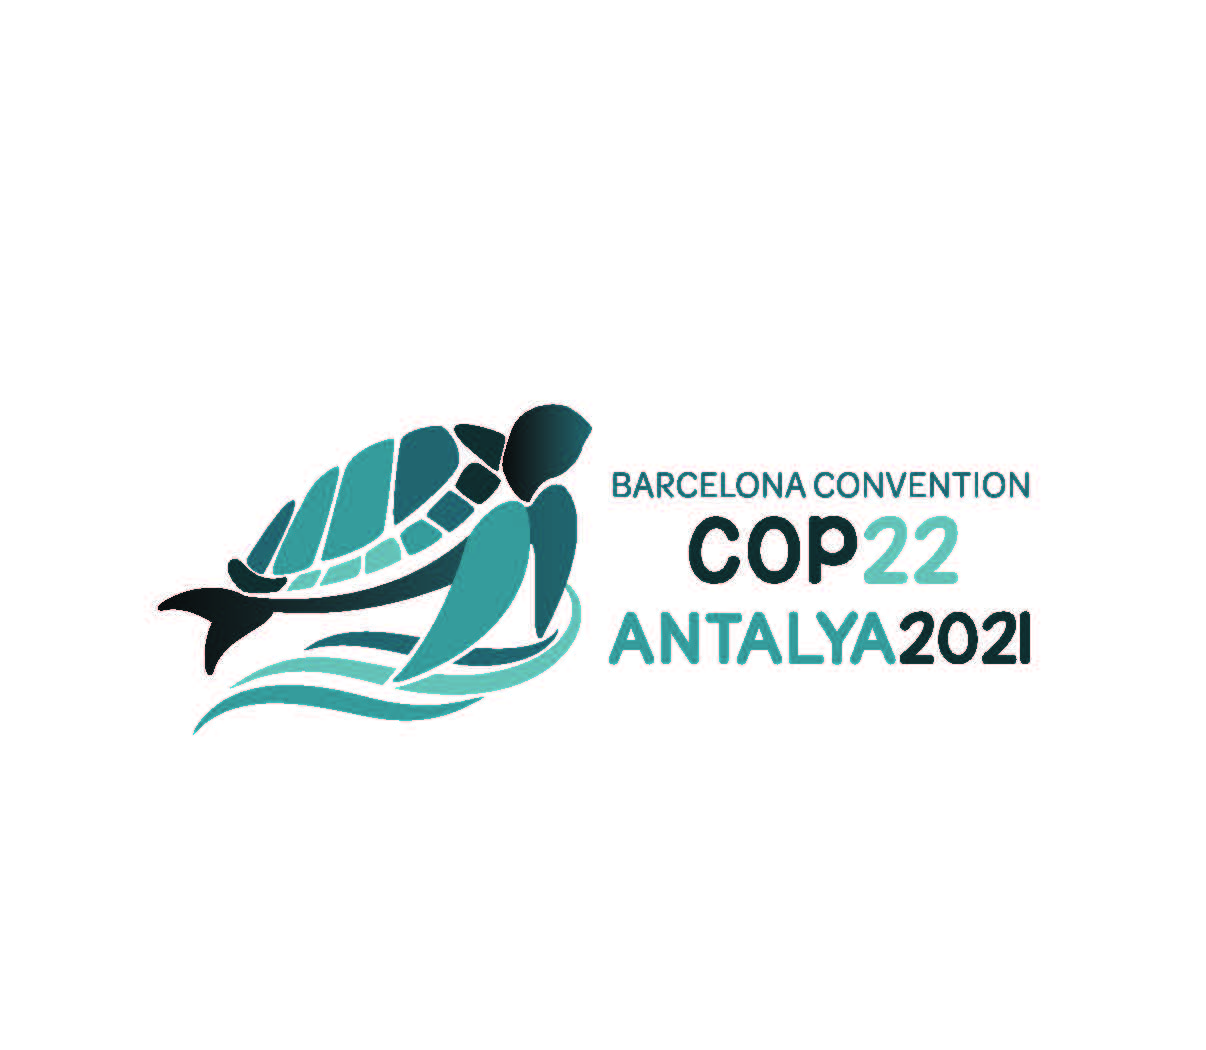 COP 22 LOGO AND HASHTAG UNVEILED DURING A PREPARATORY MEETING IN ANTALYA